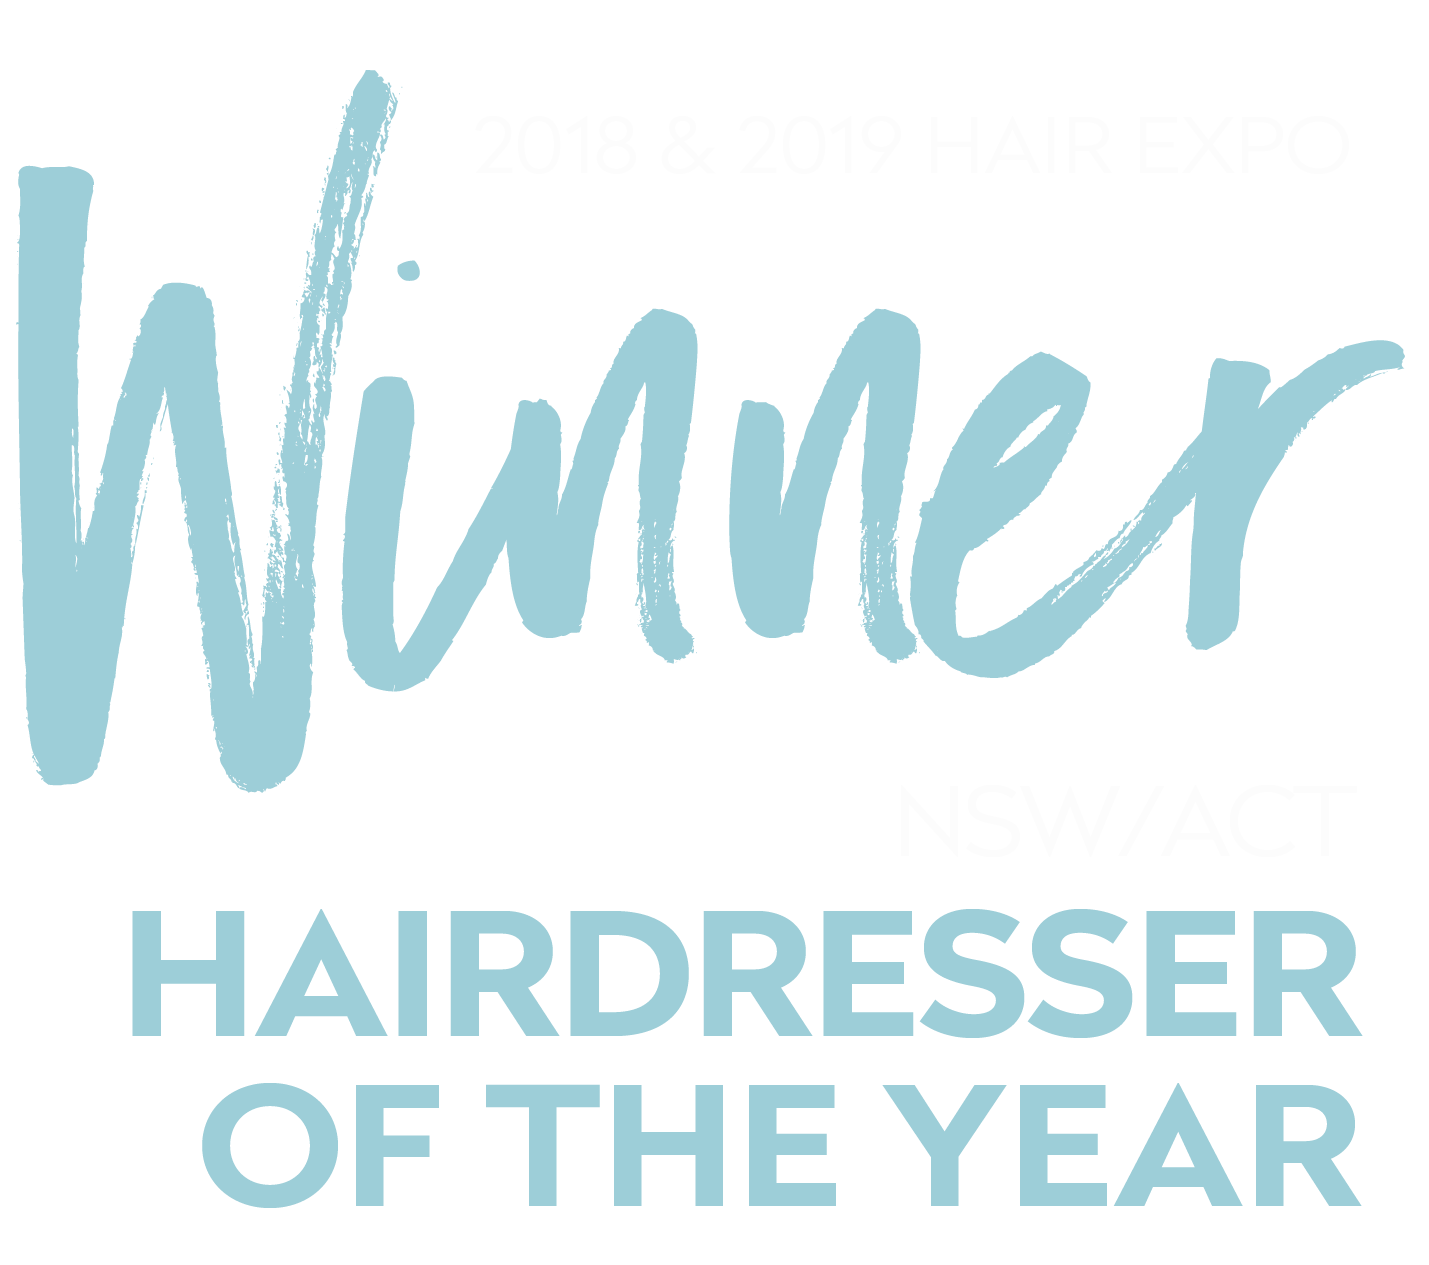 Hair Expo NSW ACT Hairdresser of the Year 2019